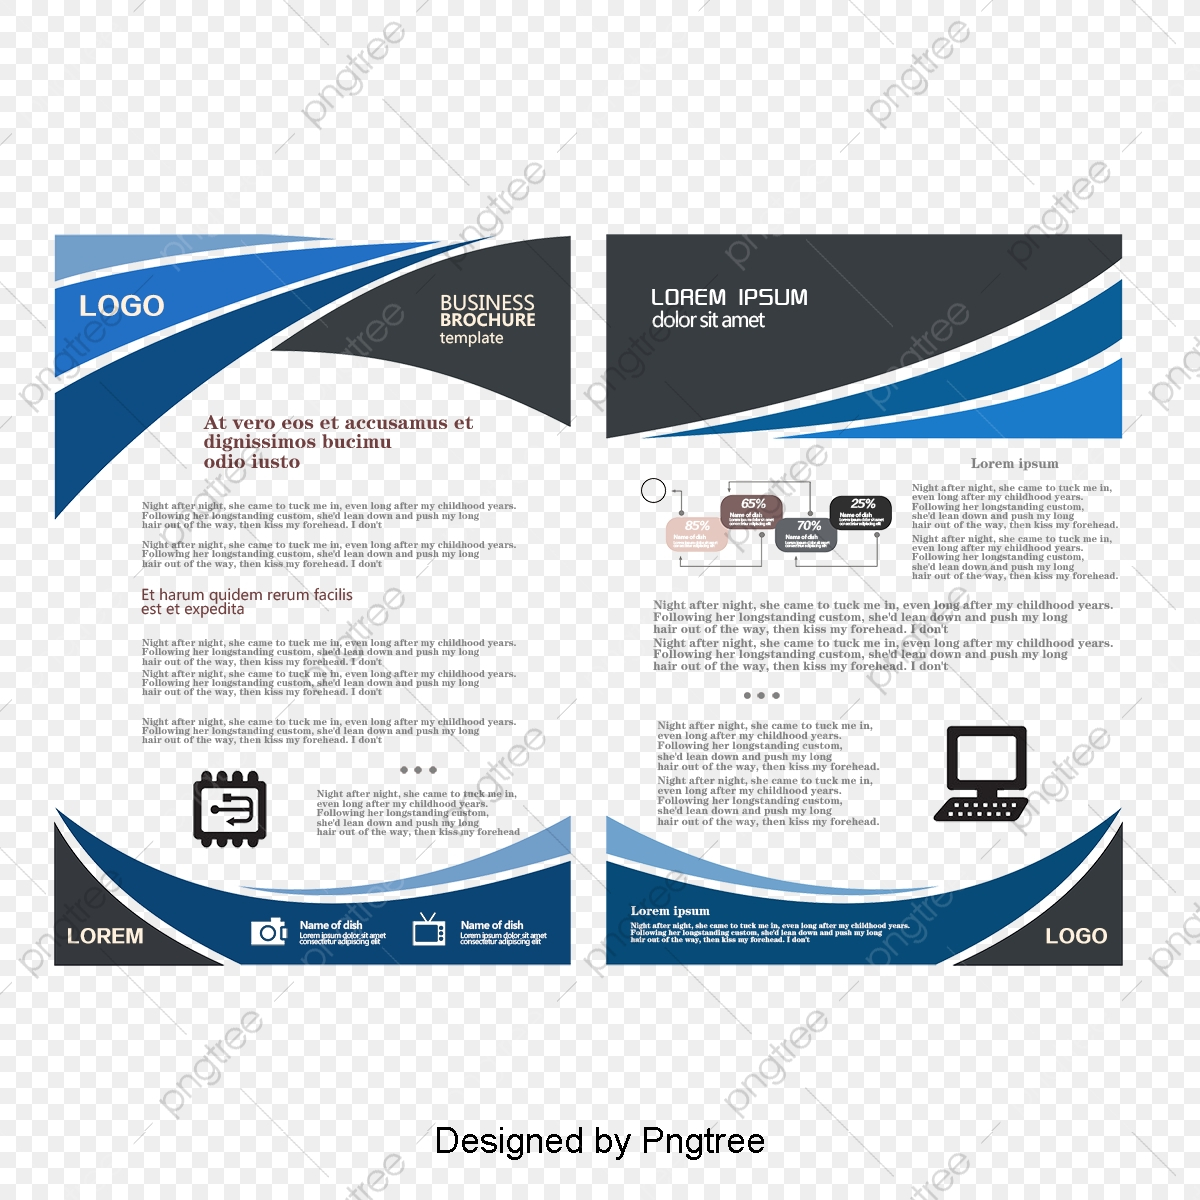 One Page Brochure PNG Transparent Images Free Download  Vector  Throughout Single Page Brochure Templates Psd